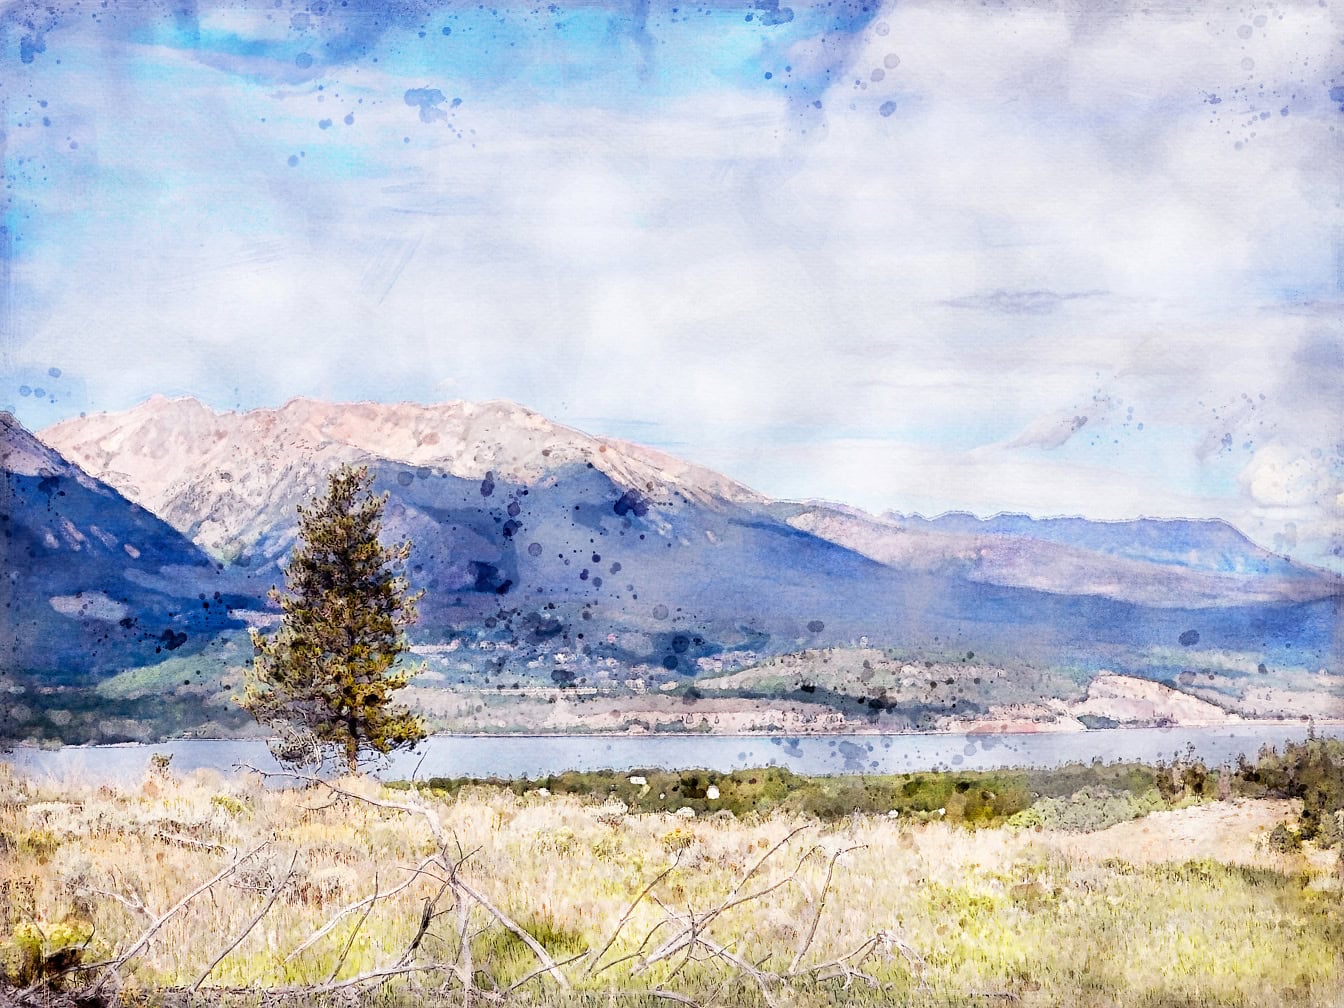 Abstract watercolor of a lakeside with a pine tree and mountains in the background